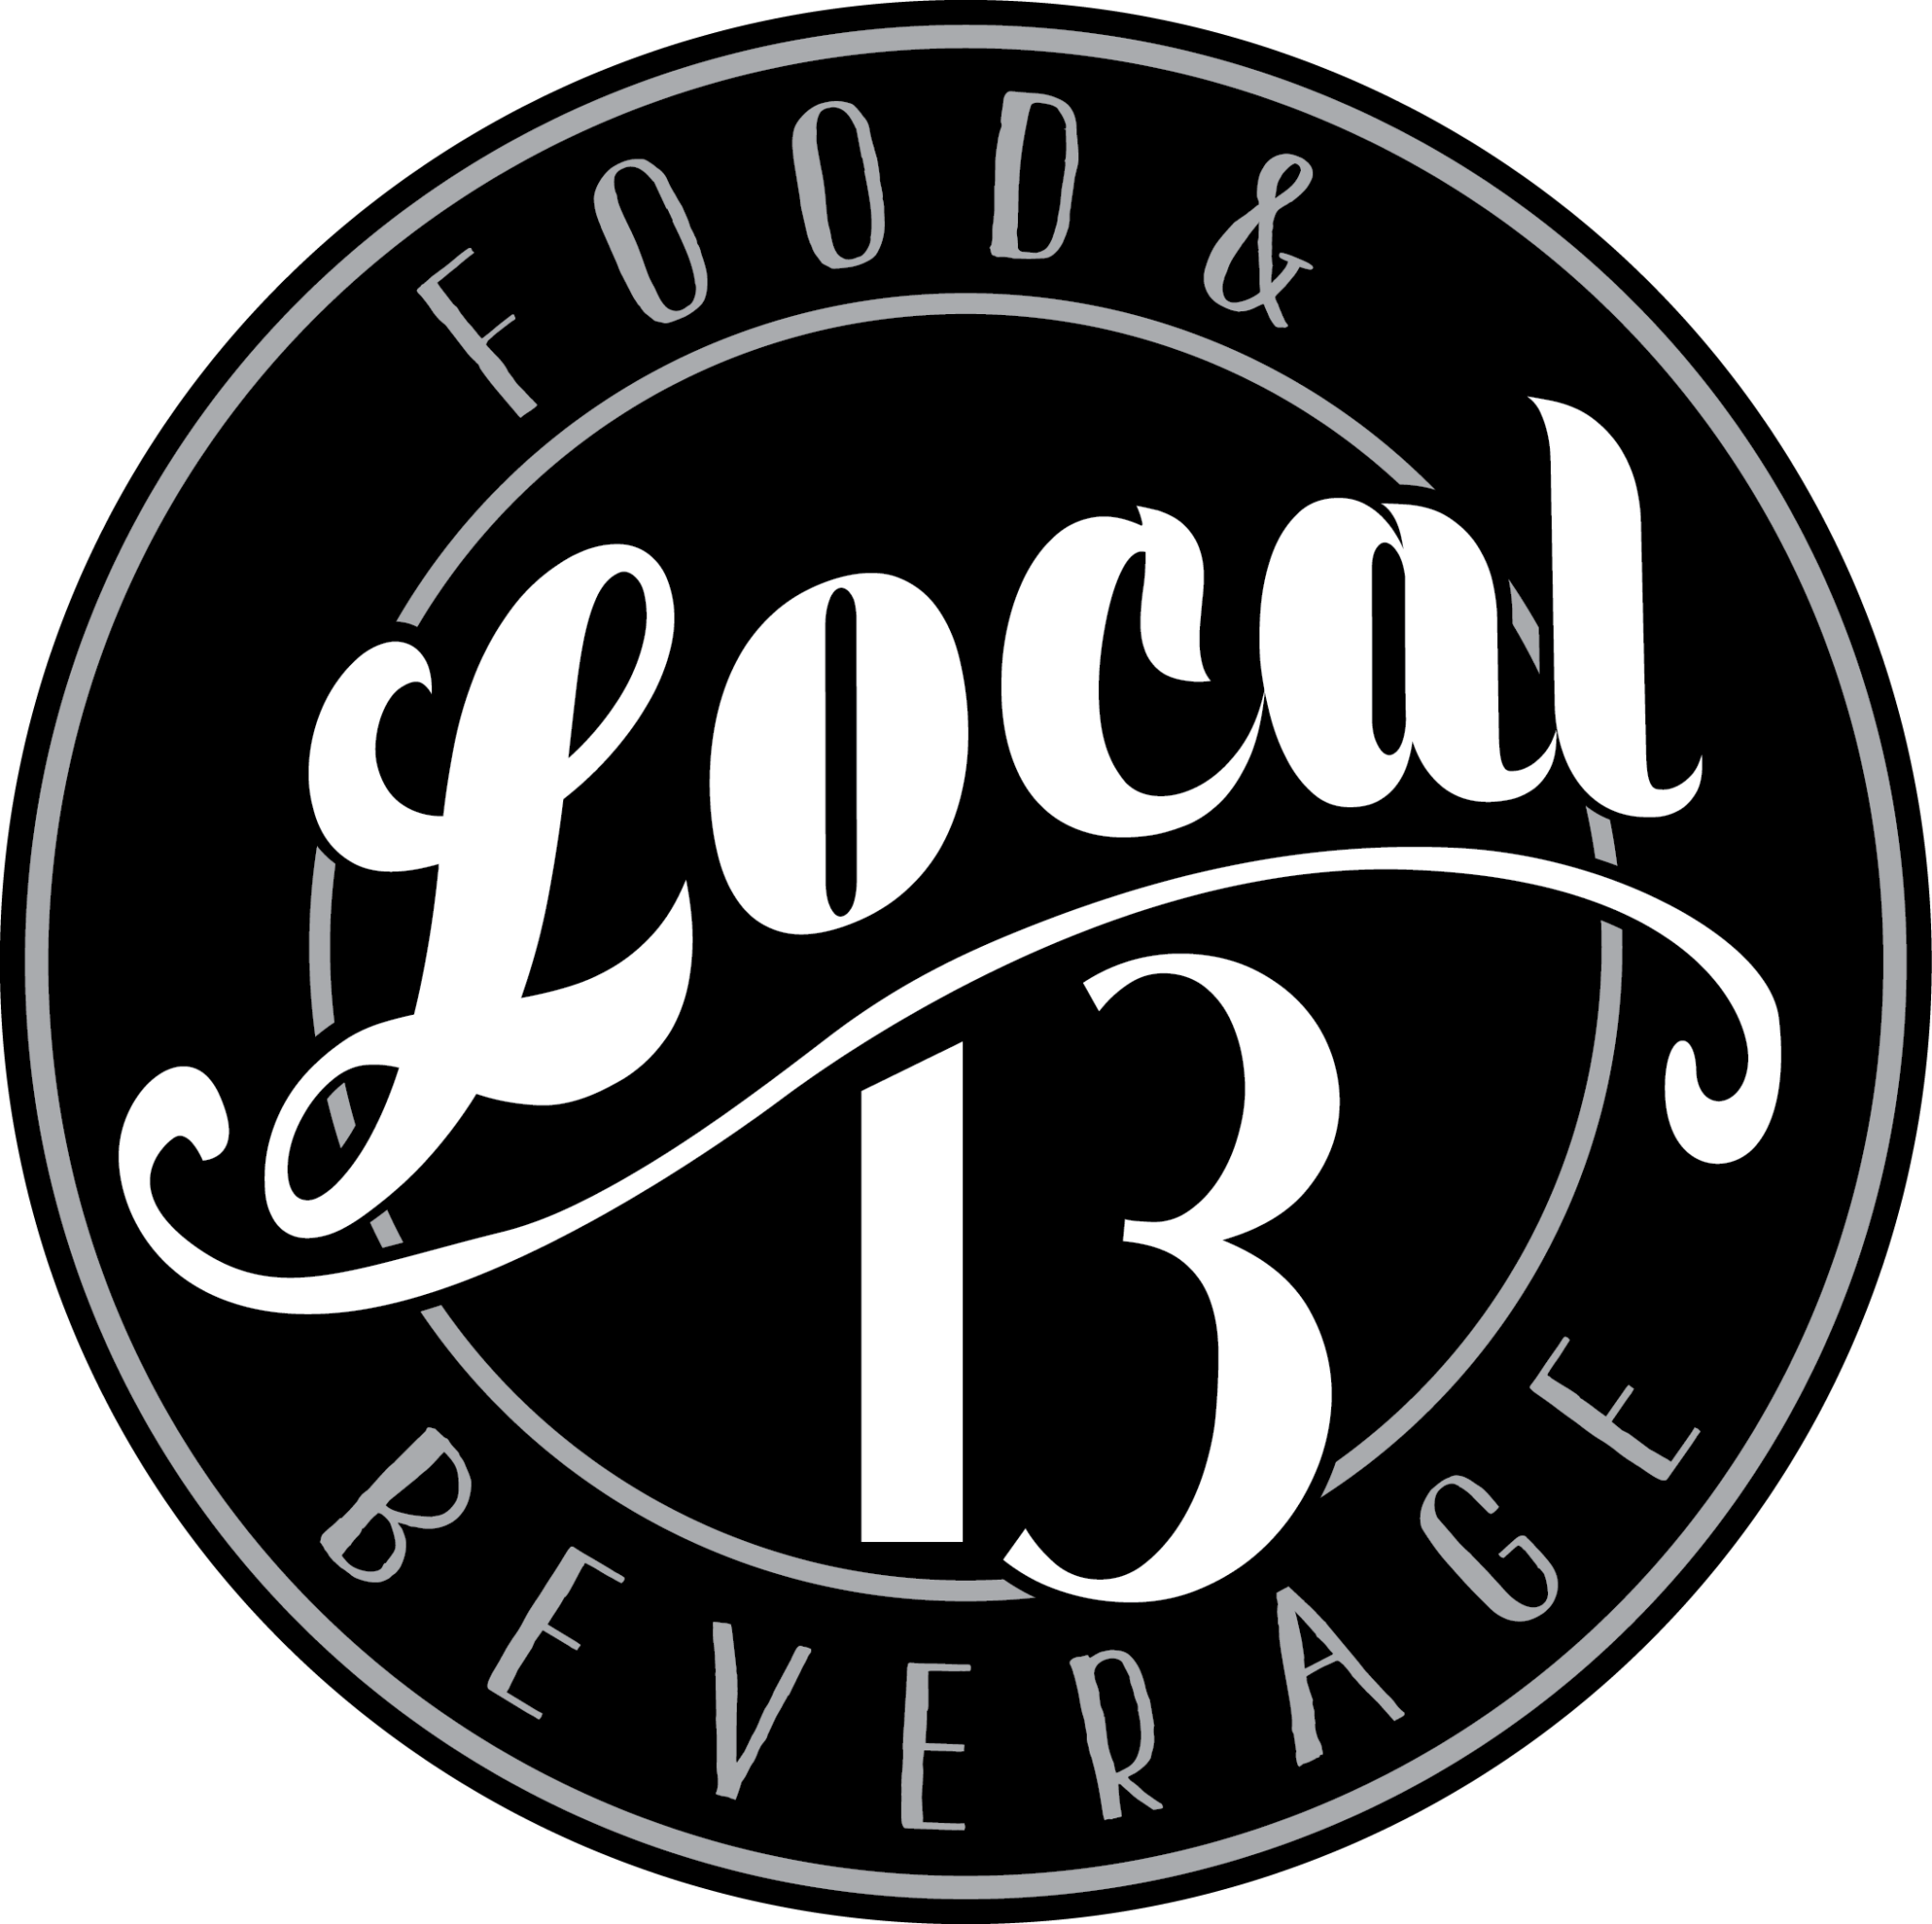 Local-13-logo-1-2048x2040.png